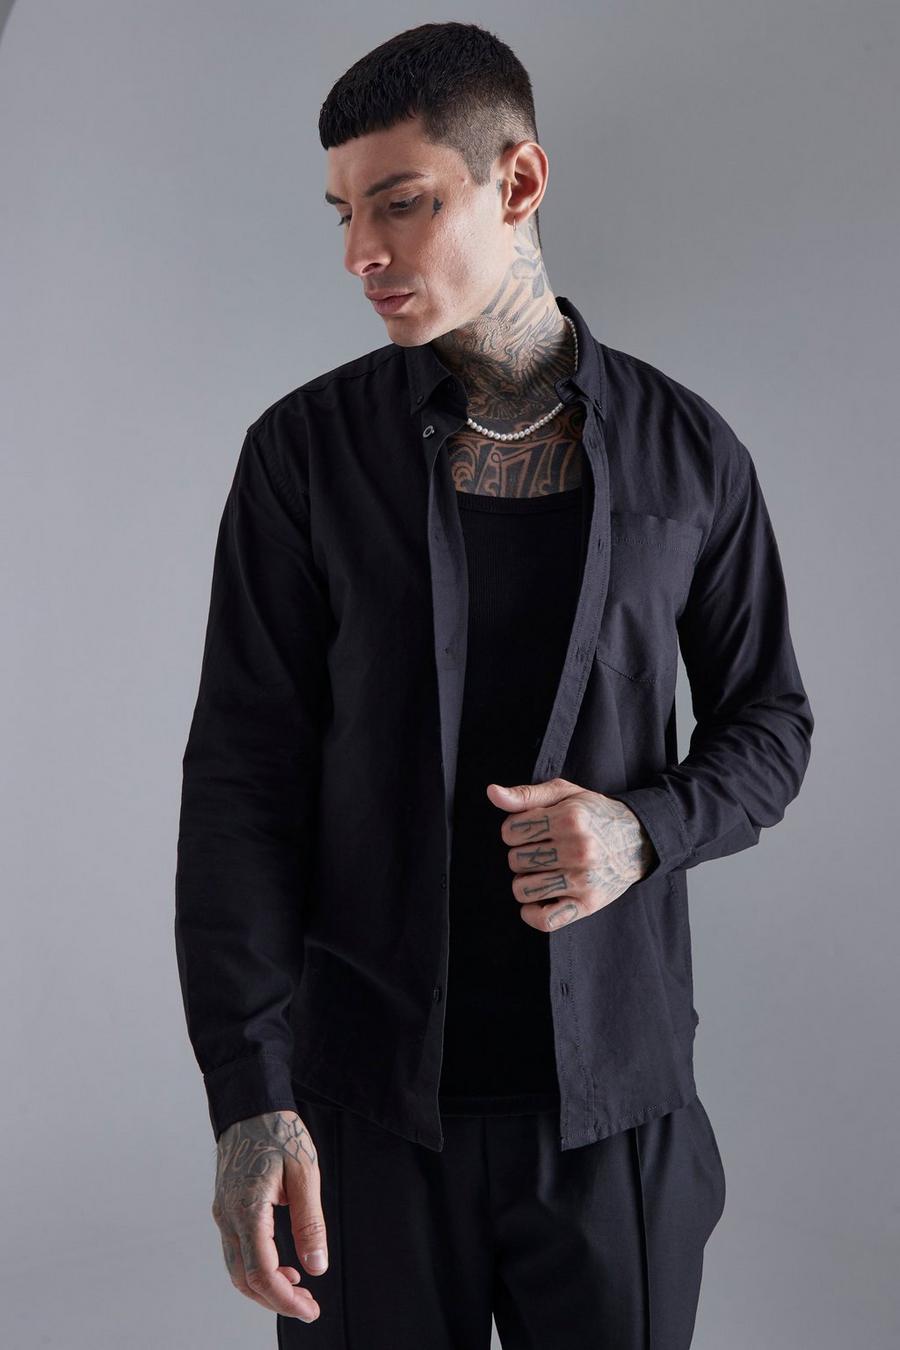 Relaxed Fit Long Sleeve Oxford Shirt, Black nero